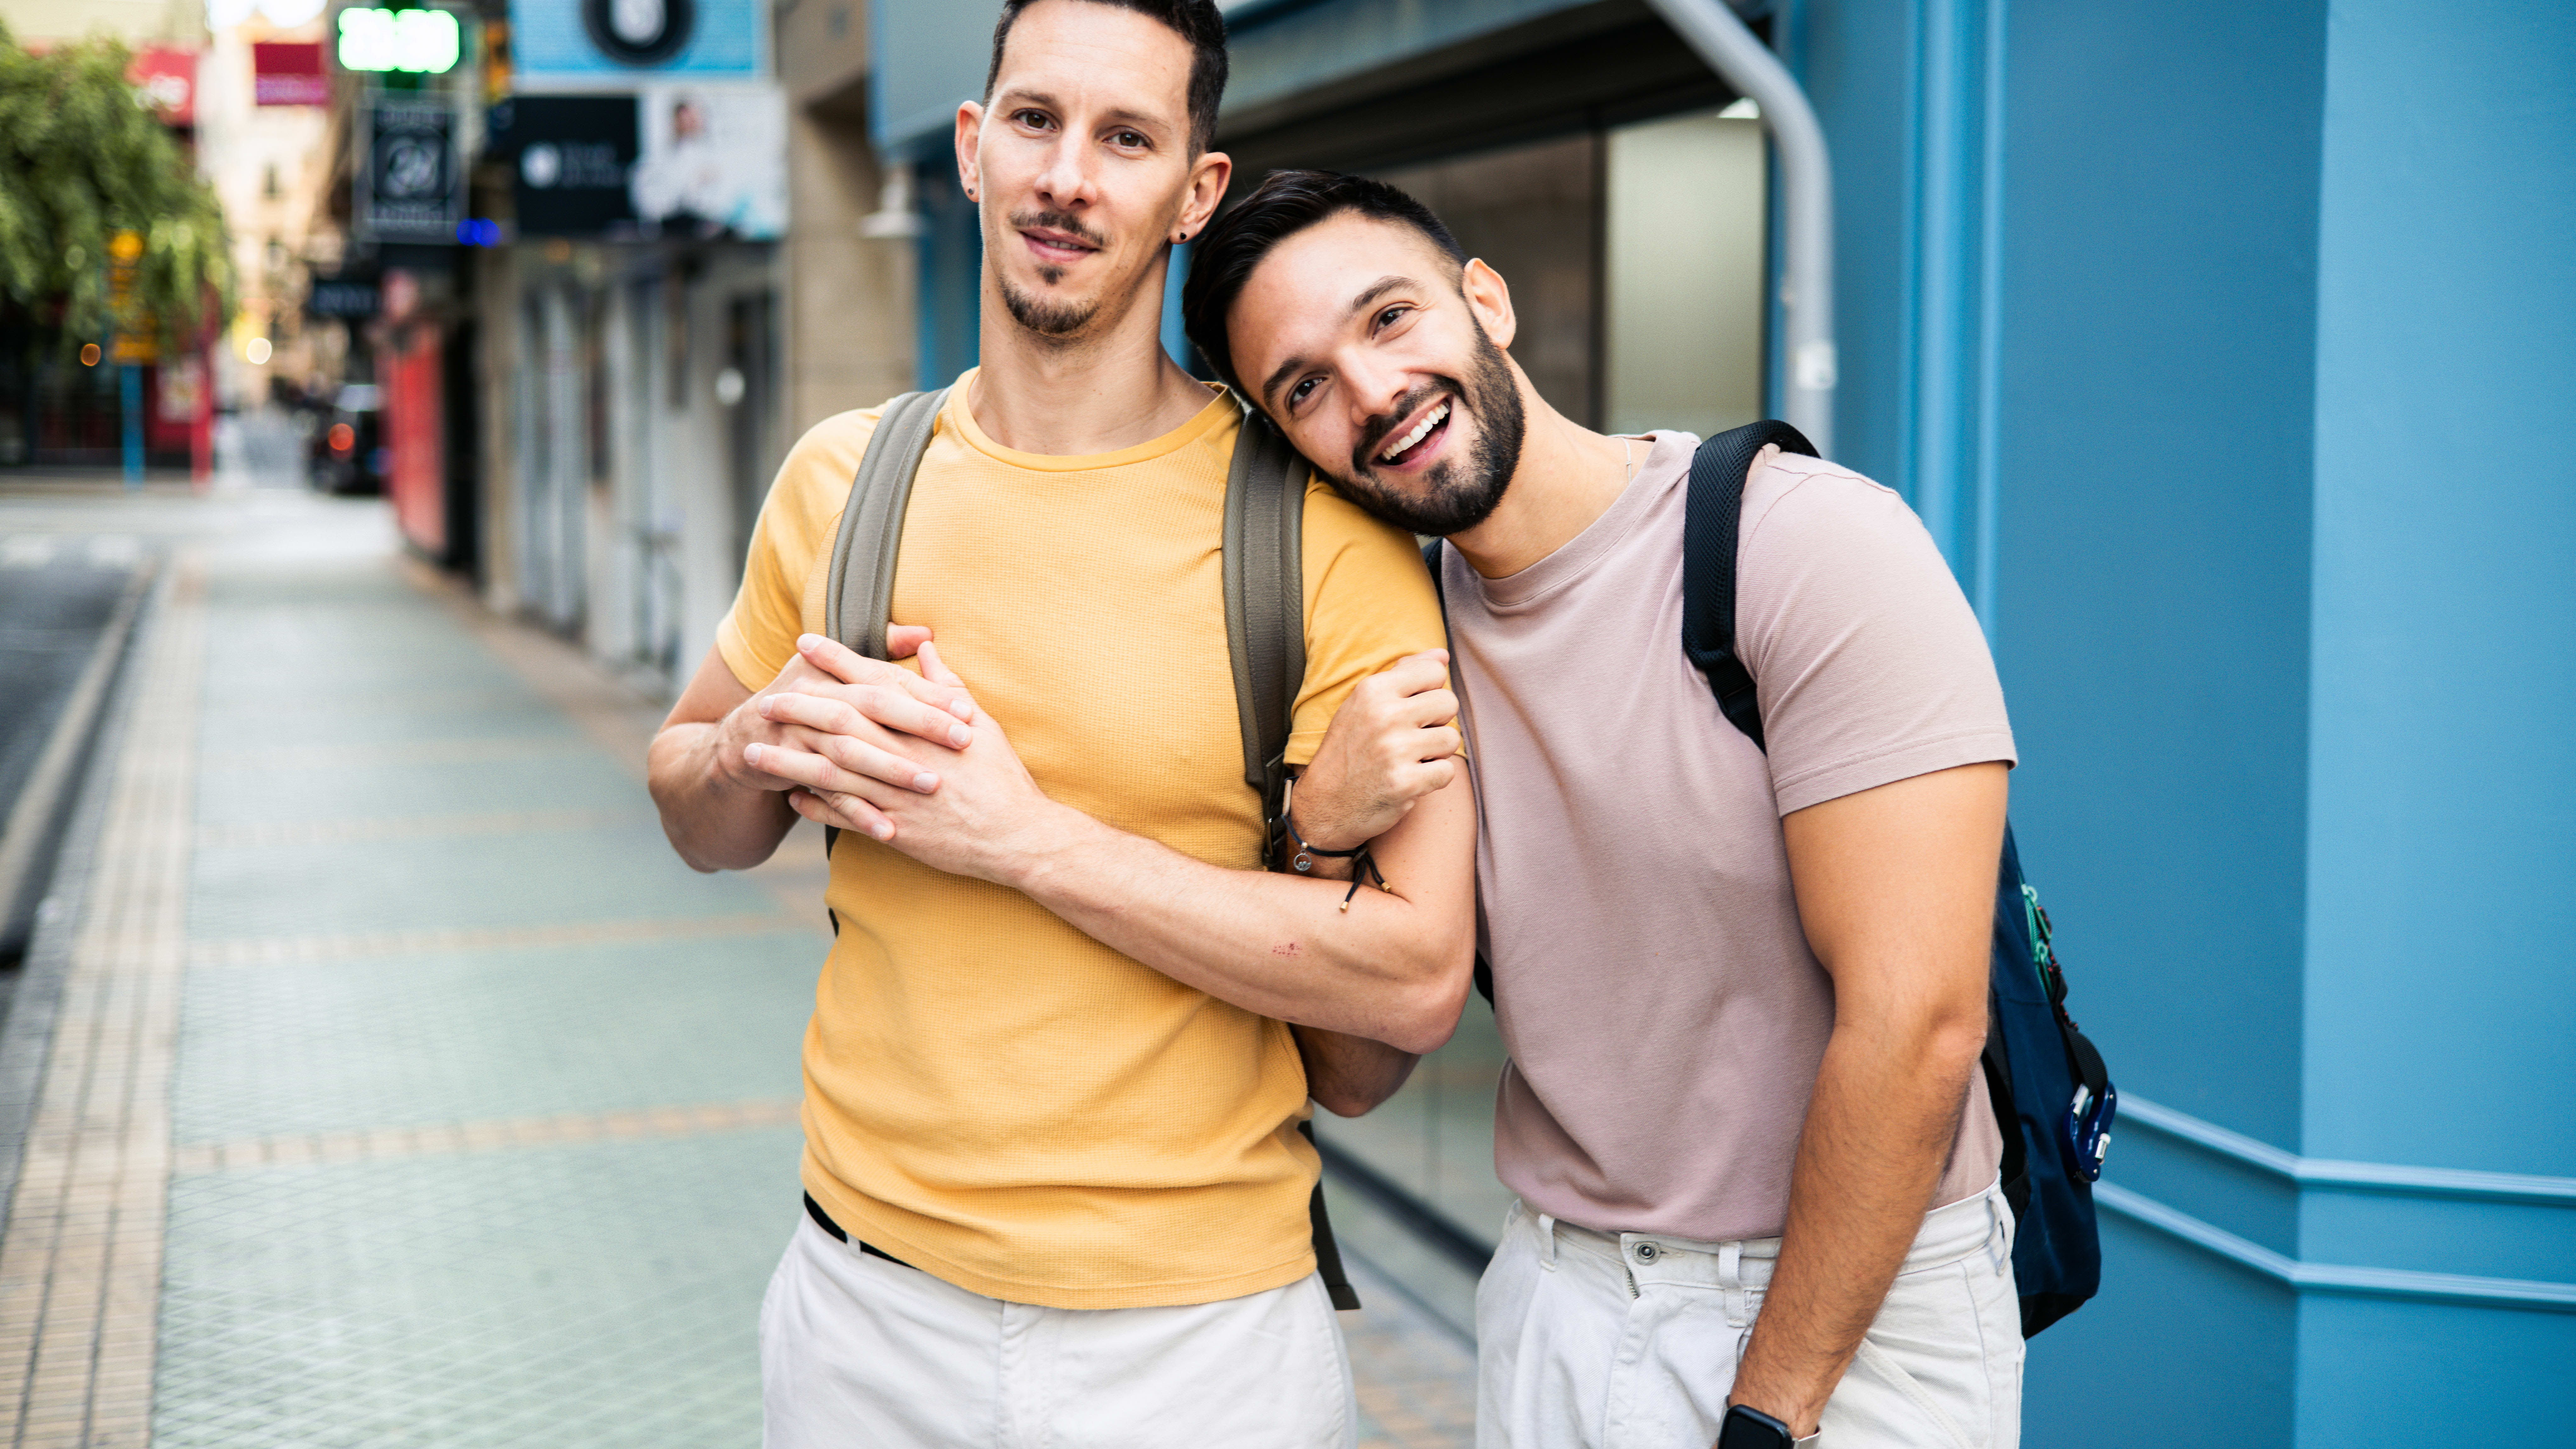 Should LGBTQ people travel to homophobic countries?